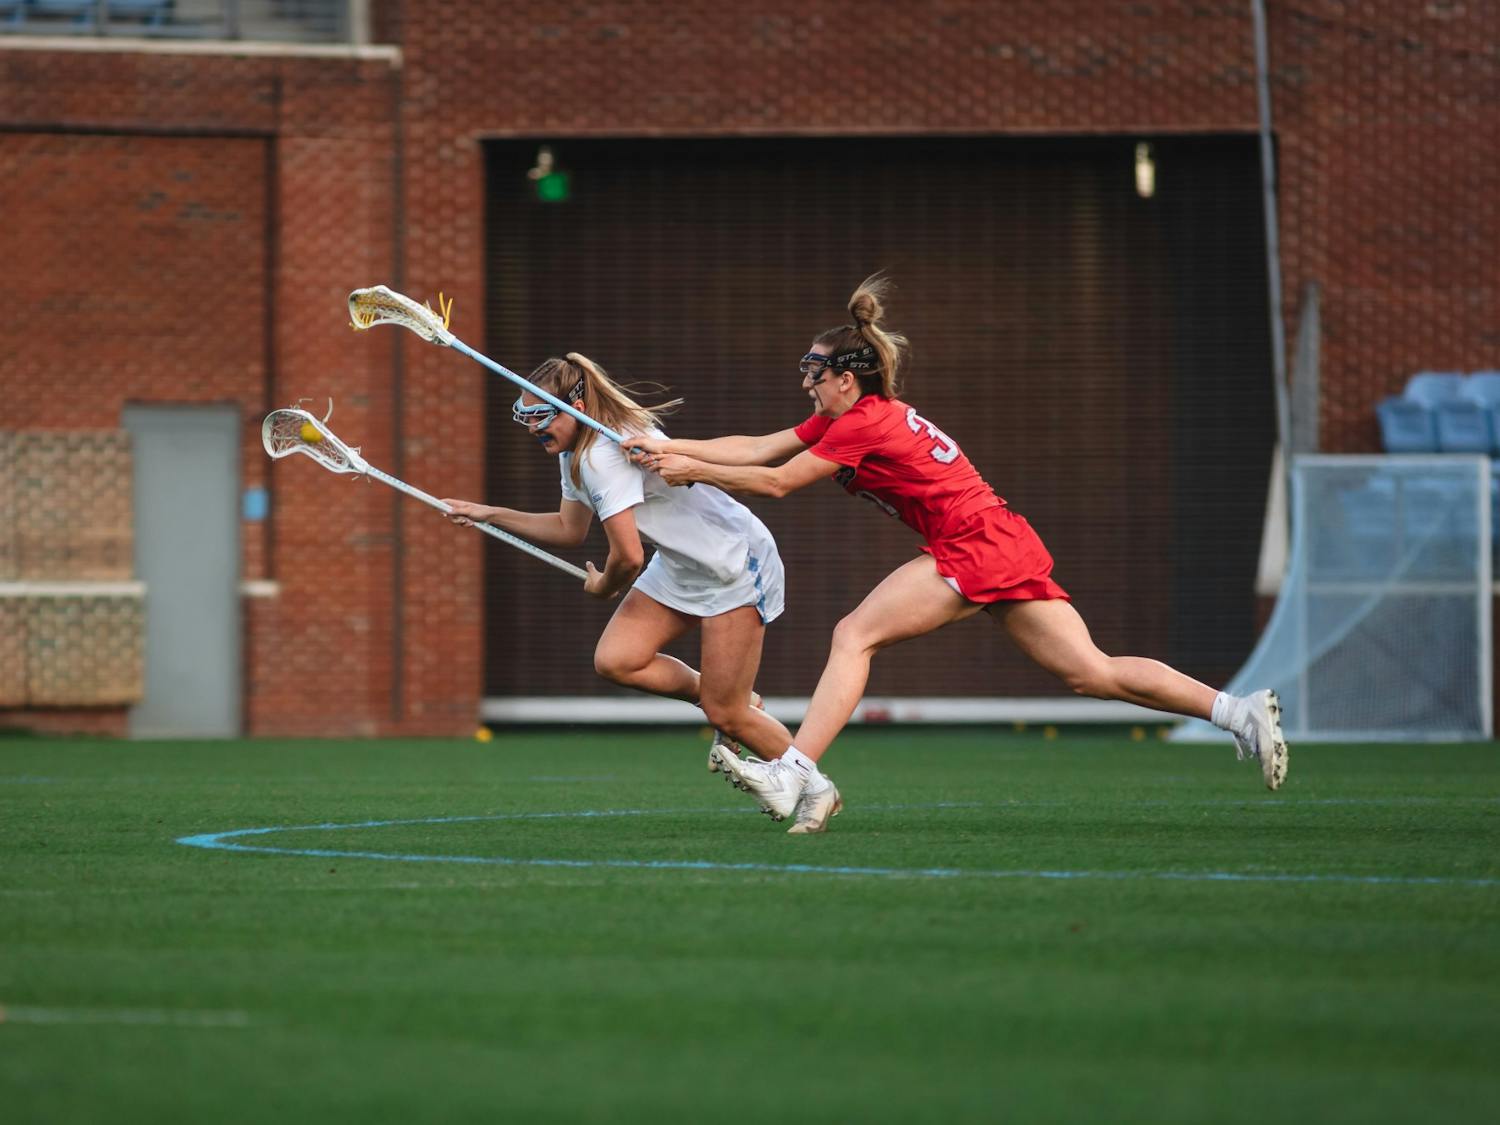 UNC senior defender Emily Nalls (1) is pictured with the ball during the women's lacrosse game against Liberty on Wednesday, Feb. 15, 2023, at Dorrance Field. UNC beat Liberty 18-6.